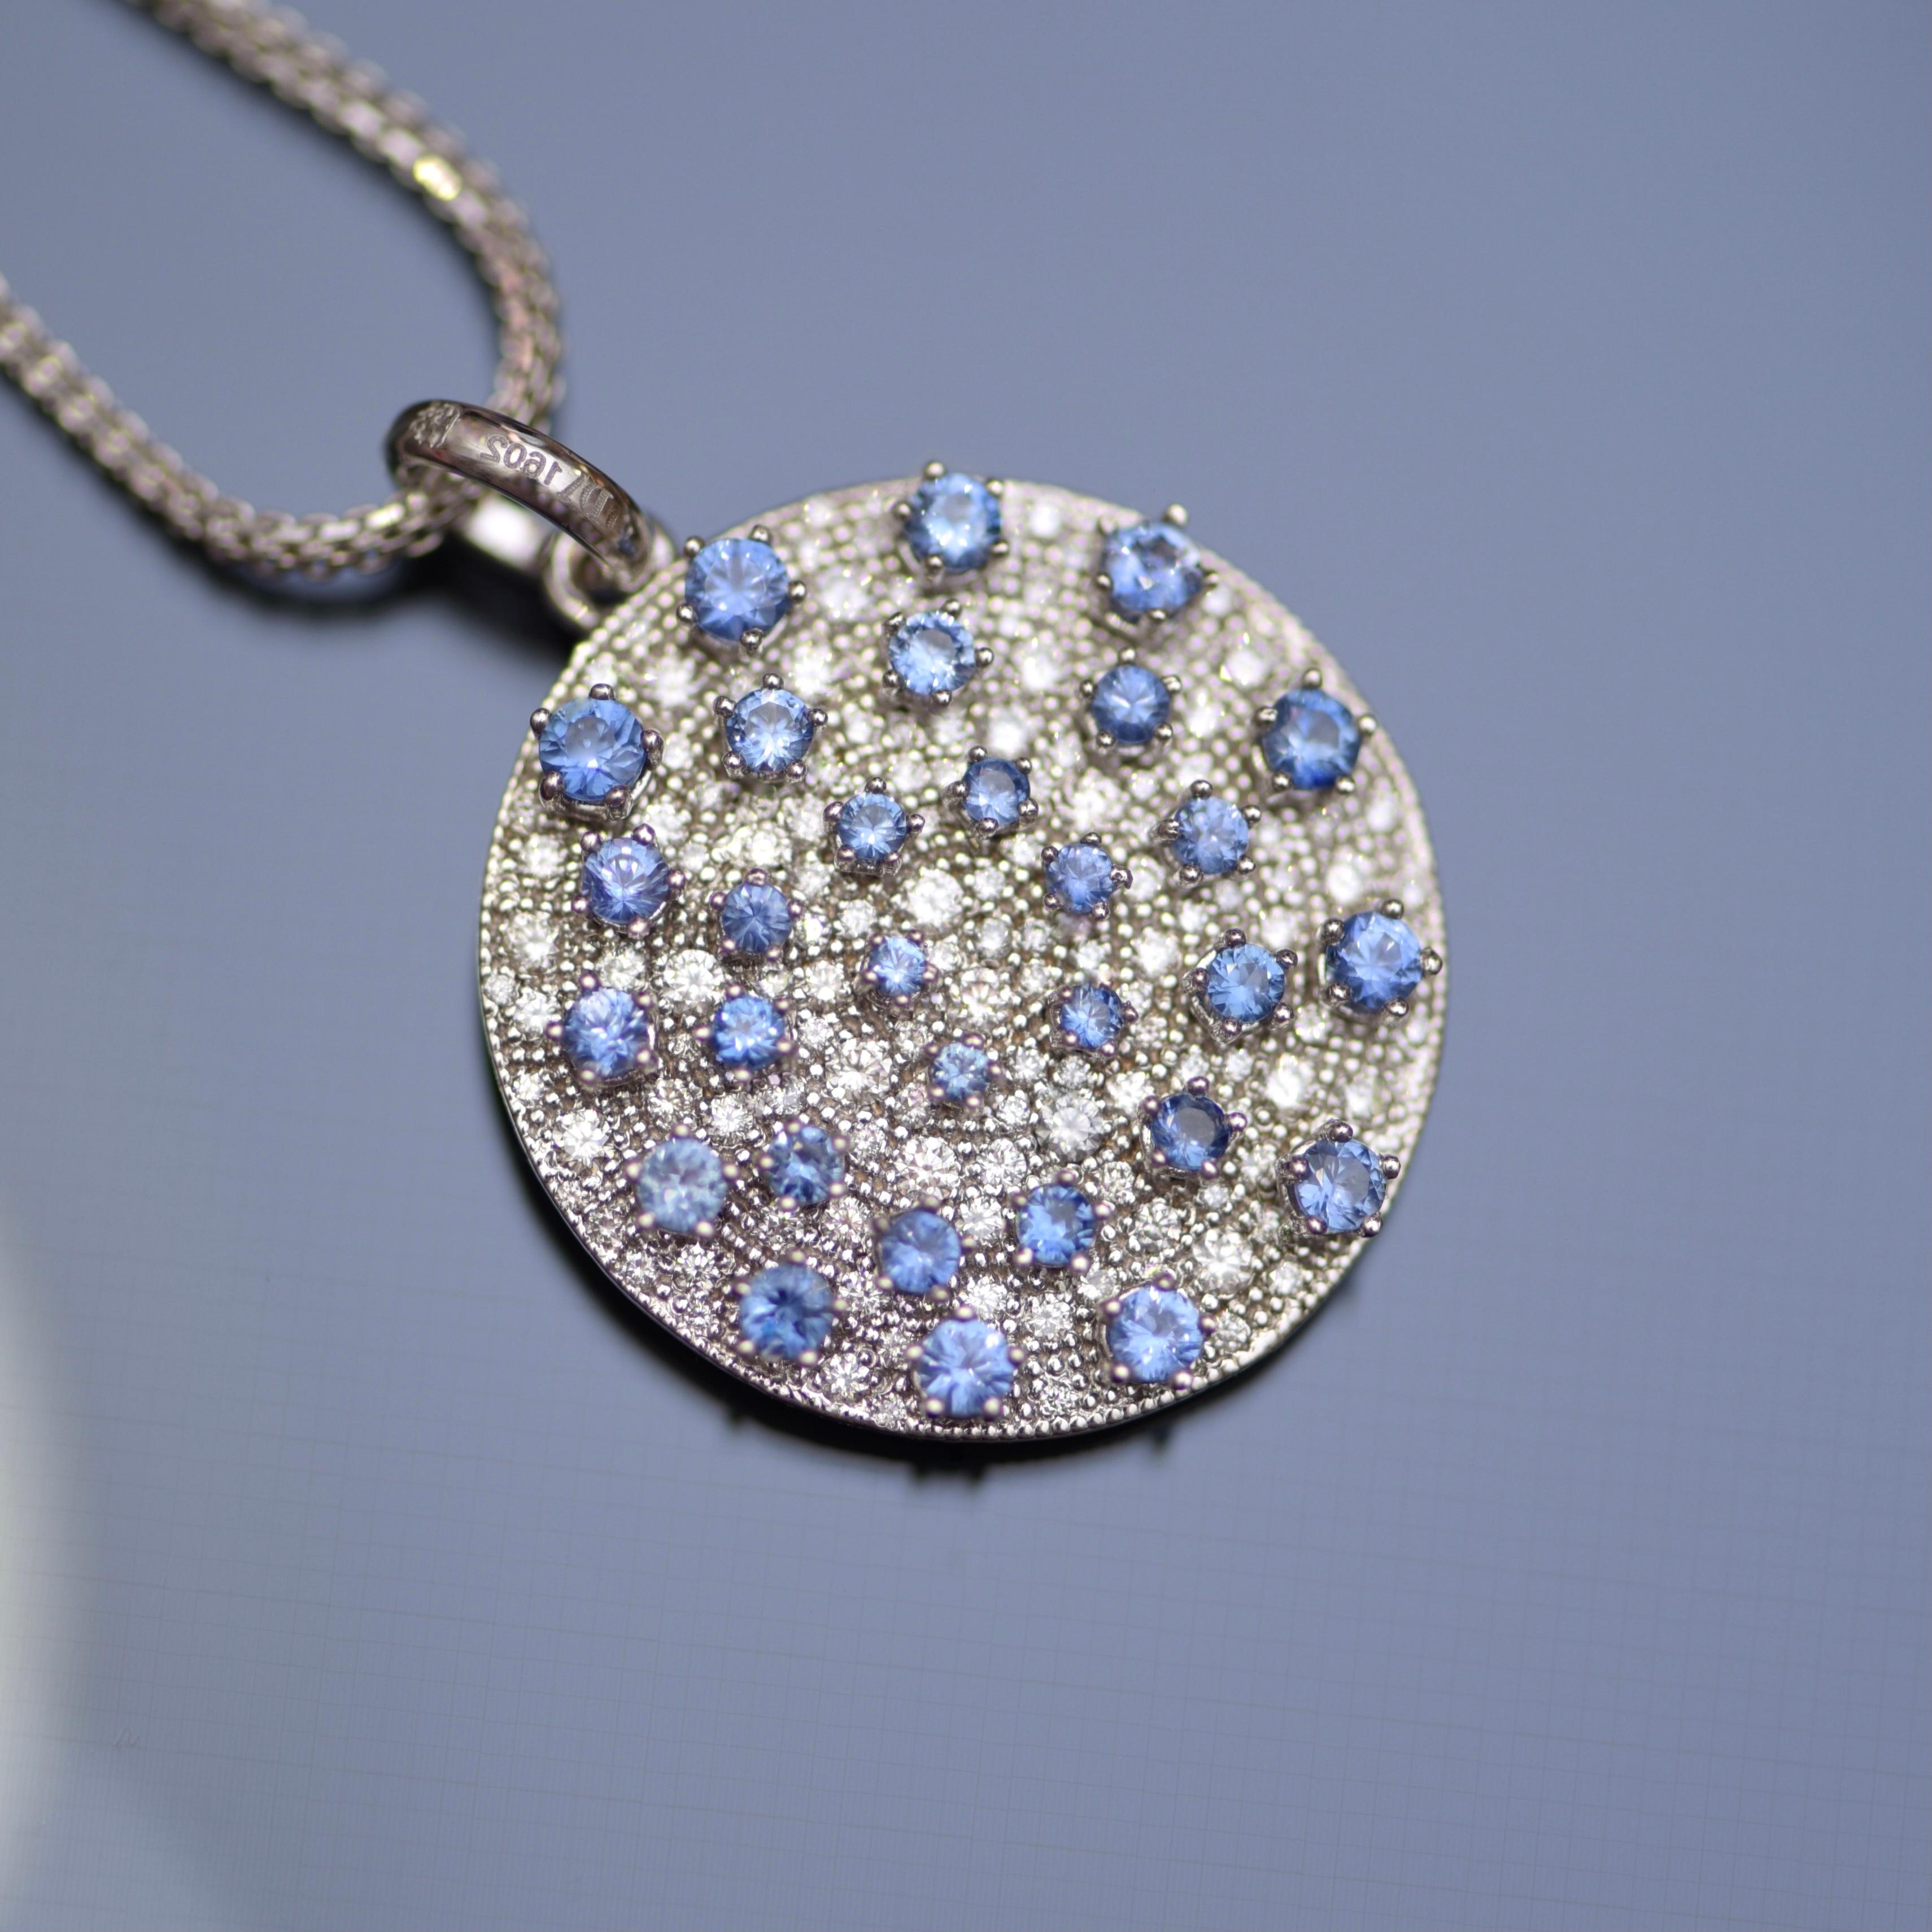 D&A Style presents the whimsical Blue Sapphire and diamonds Pendant from the Galaxy Collection - something unique and unusual. You could wear this pendant both sides - on the first side there are diamonds and blue sapphires - as a Milky way pattern,